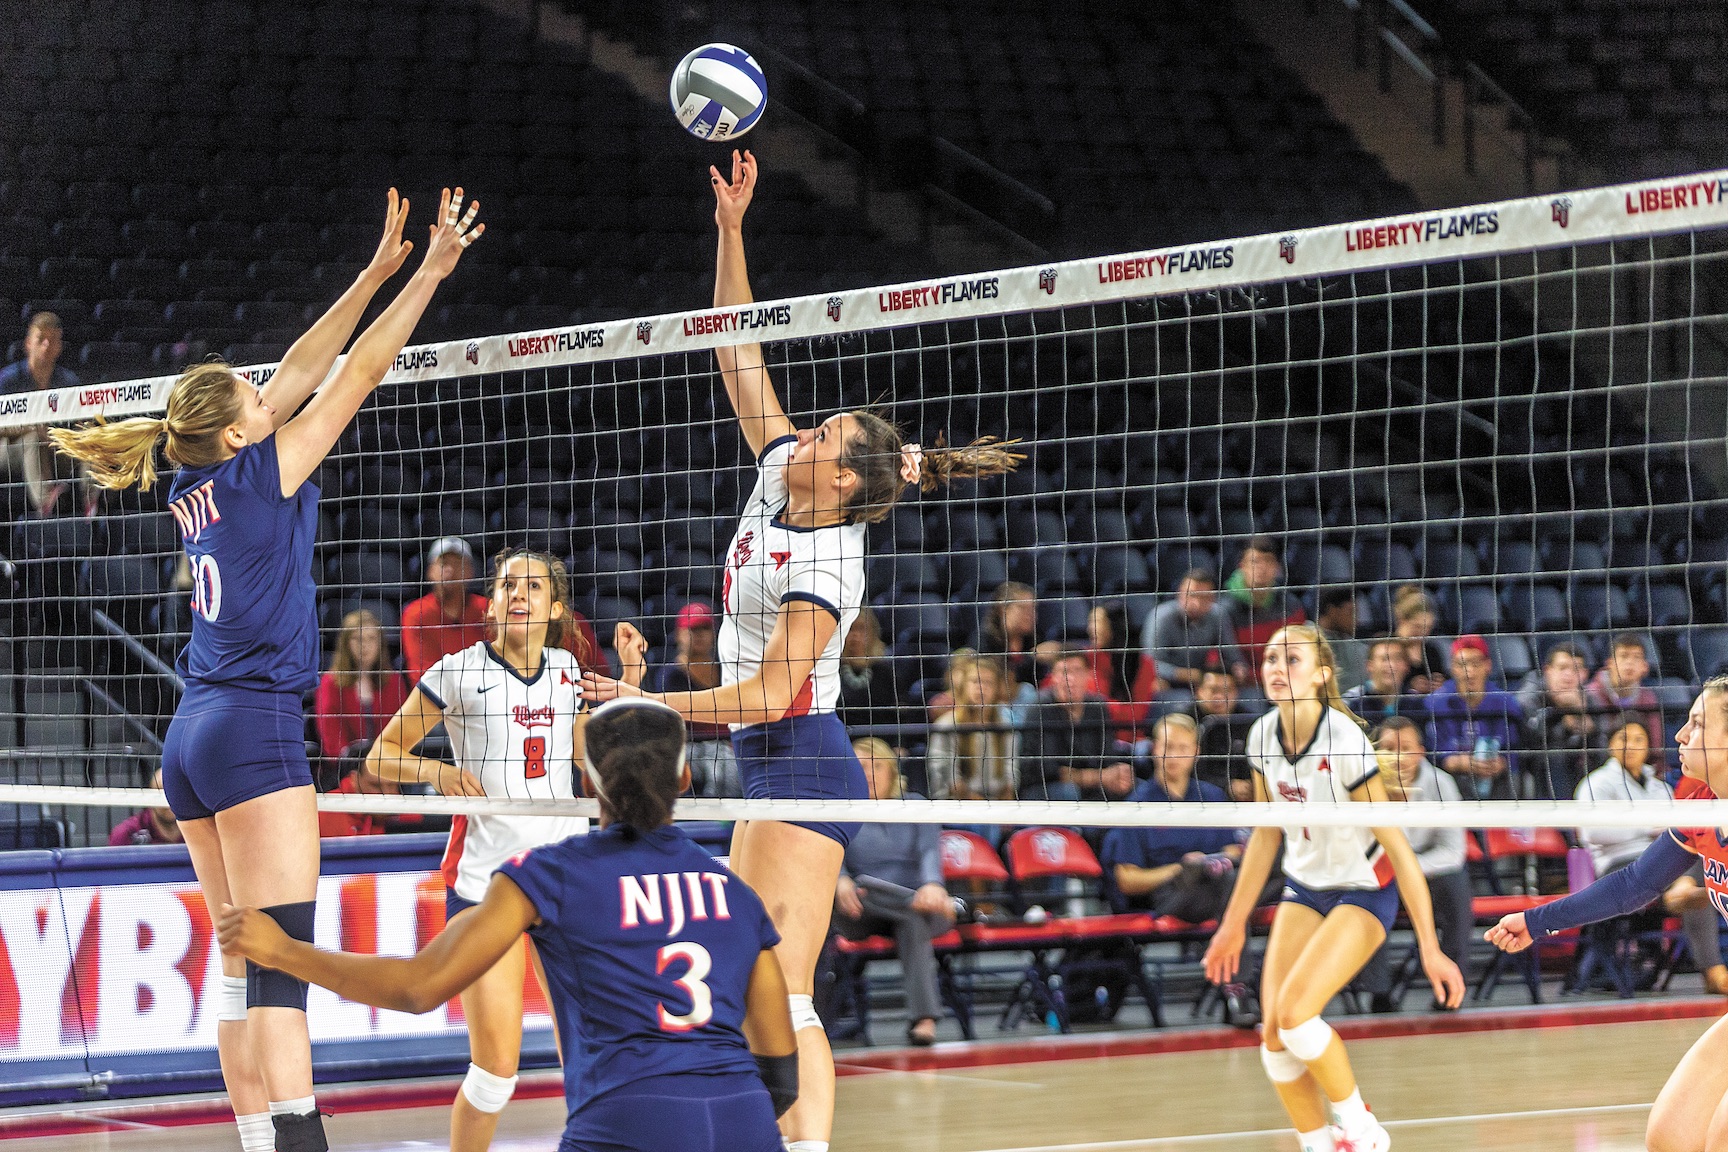 Volleyball ends first ASUN season - The Liberty Champion